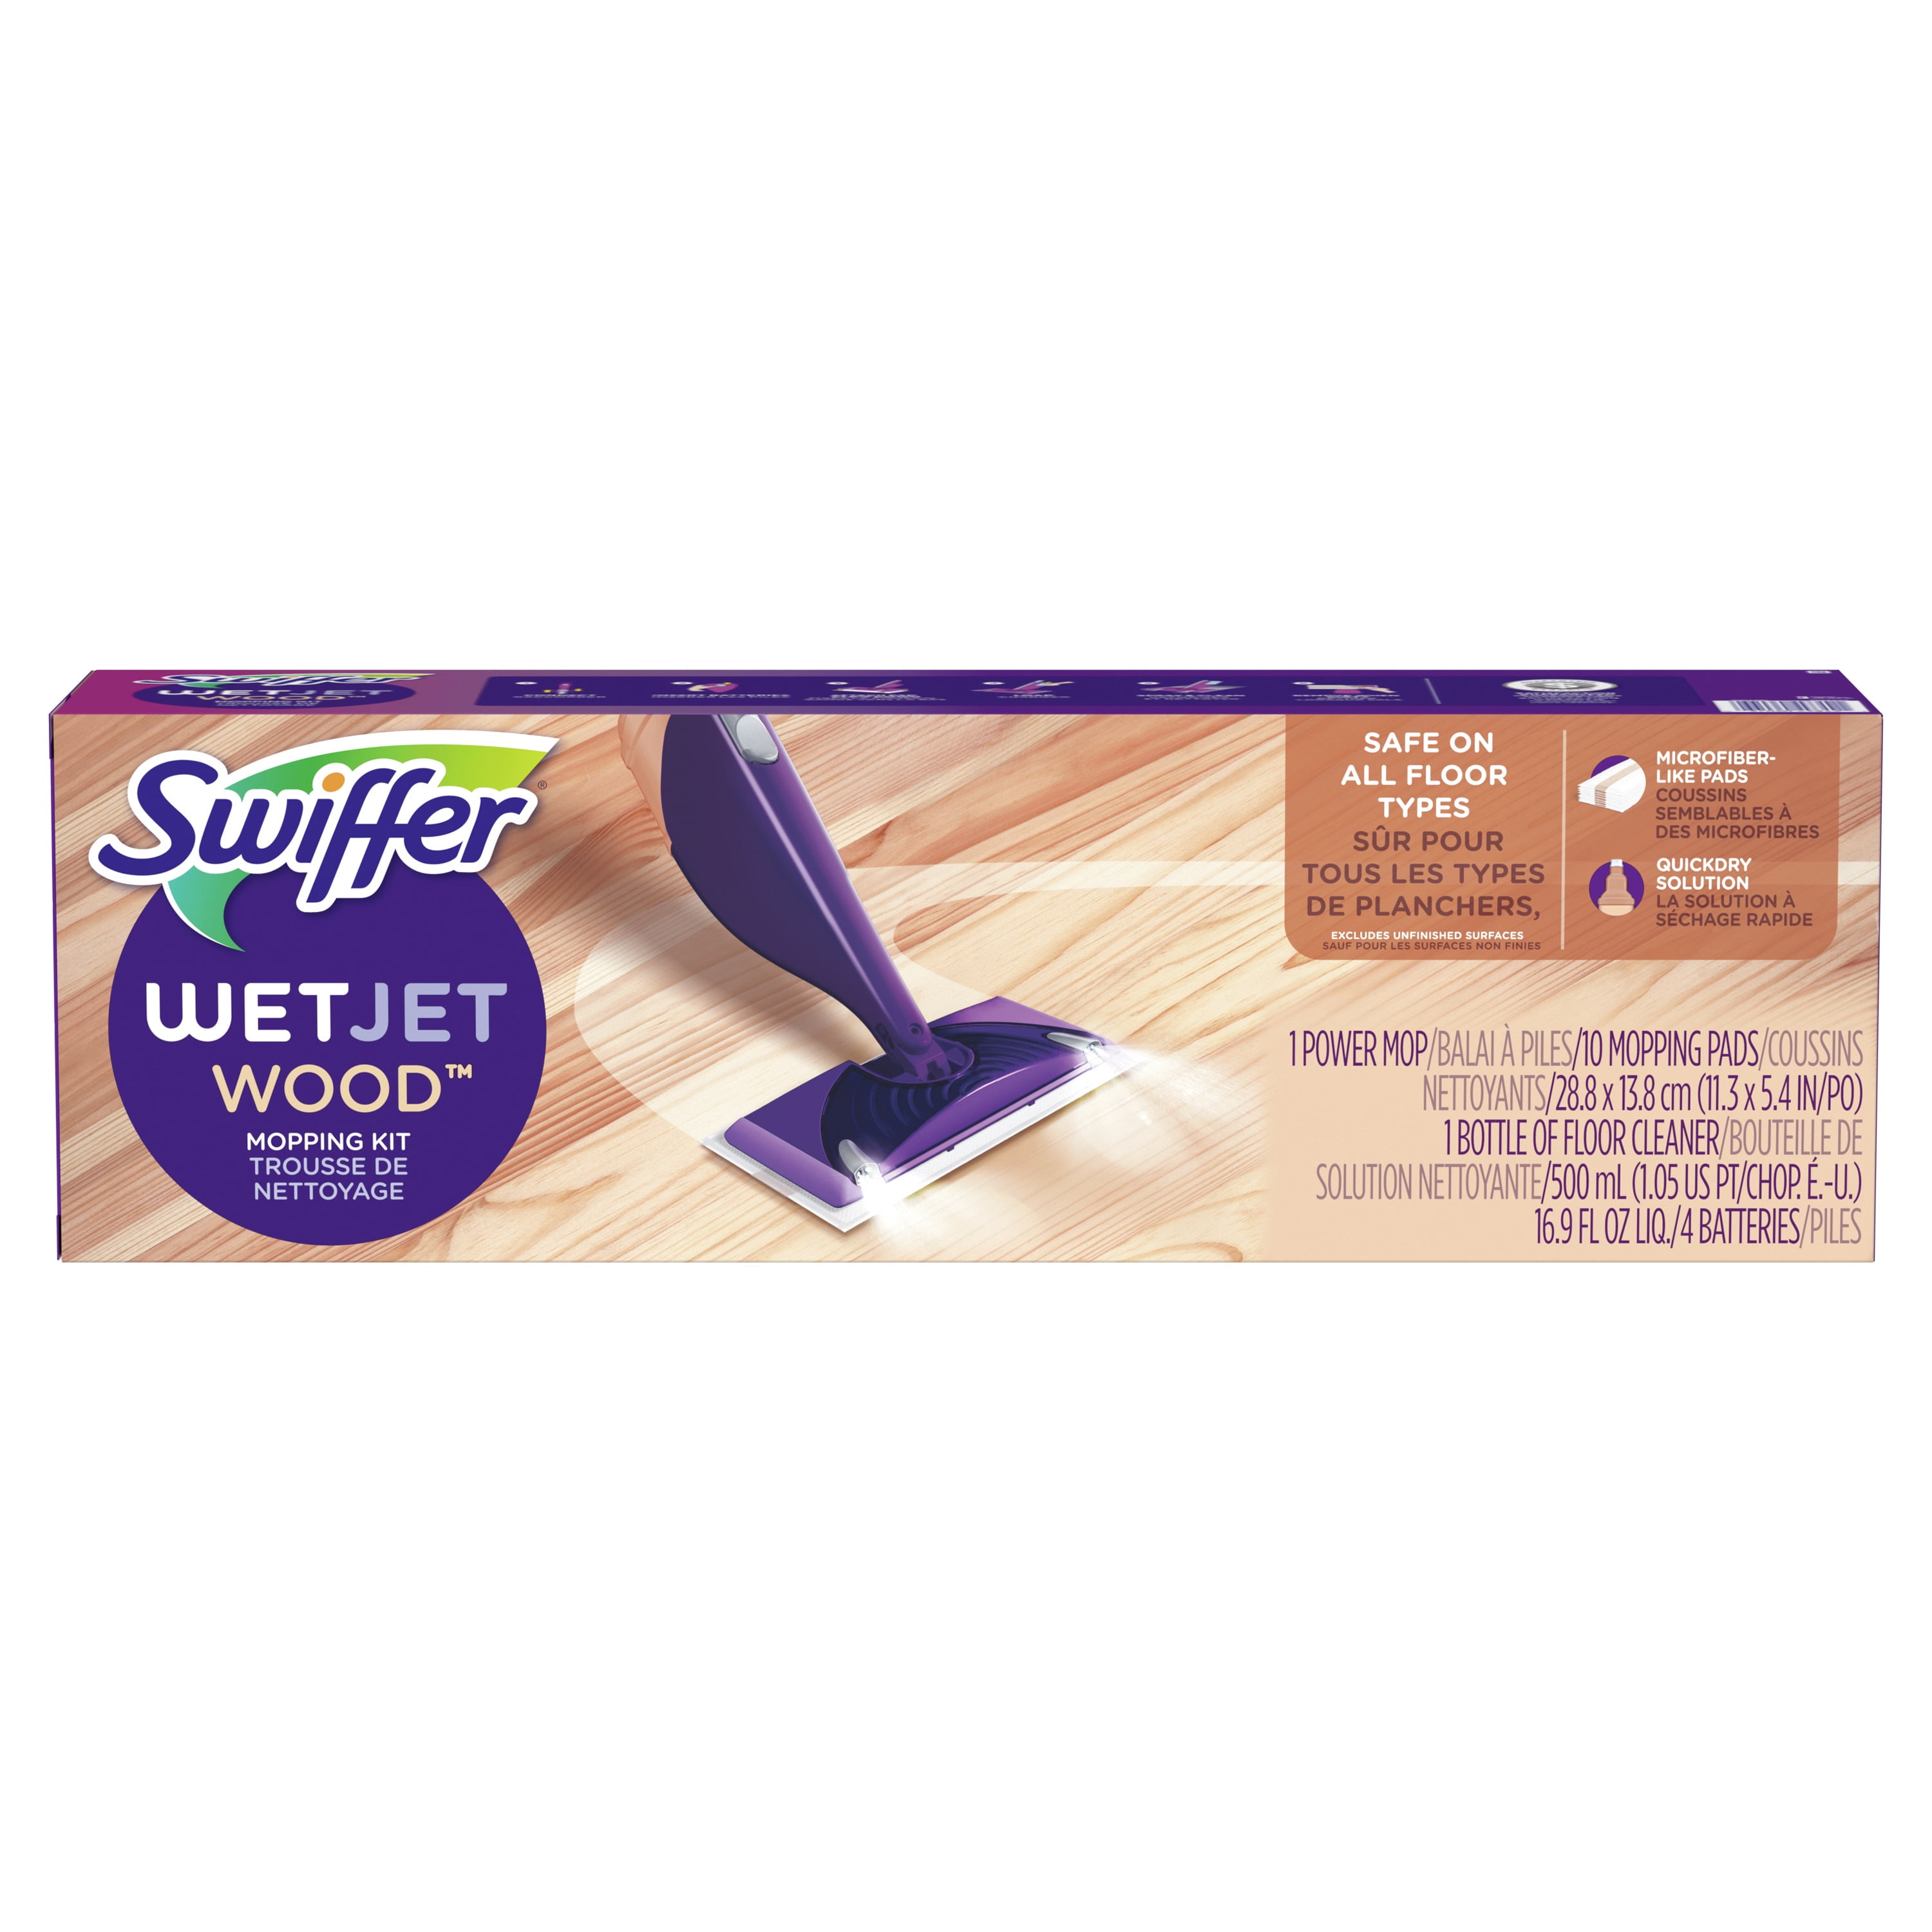 Swiffer WetJet Hardwood and Floor Spray Mop Cleaner Starter Kit, Includes:  1 Power Mop, 10 Pads, Cleaning Solution, Batteries 